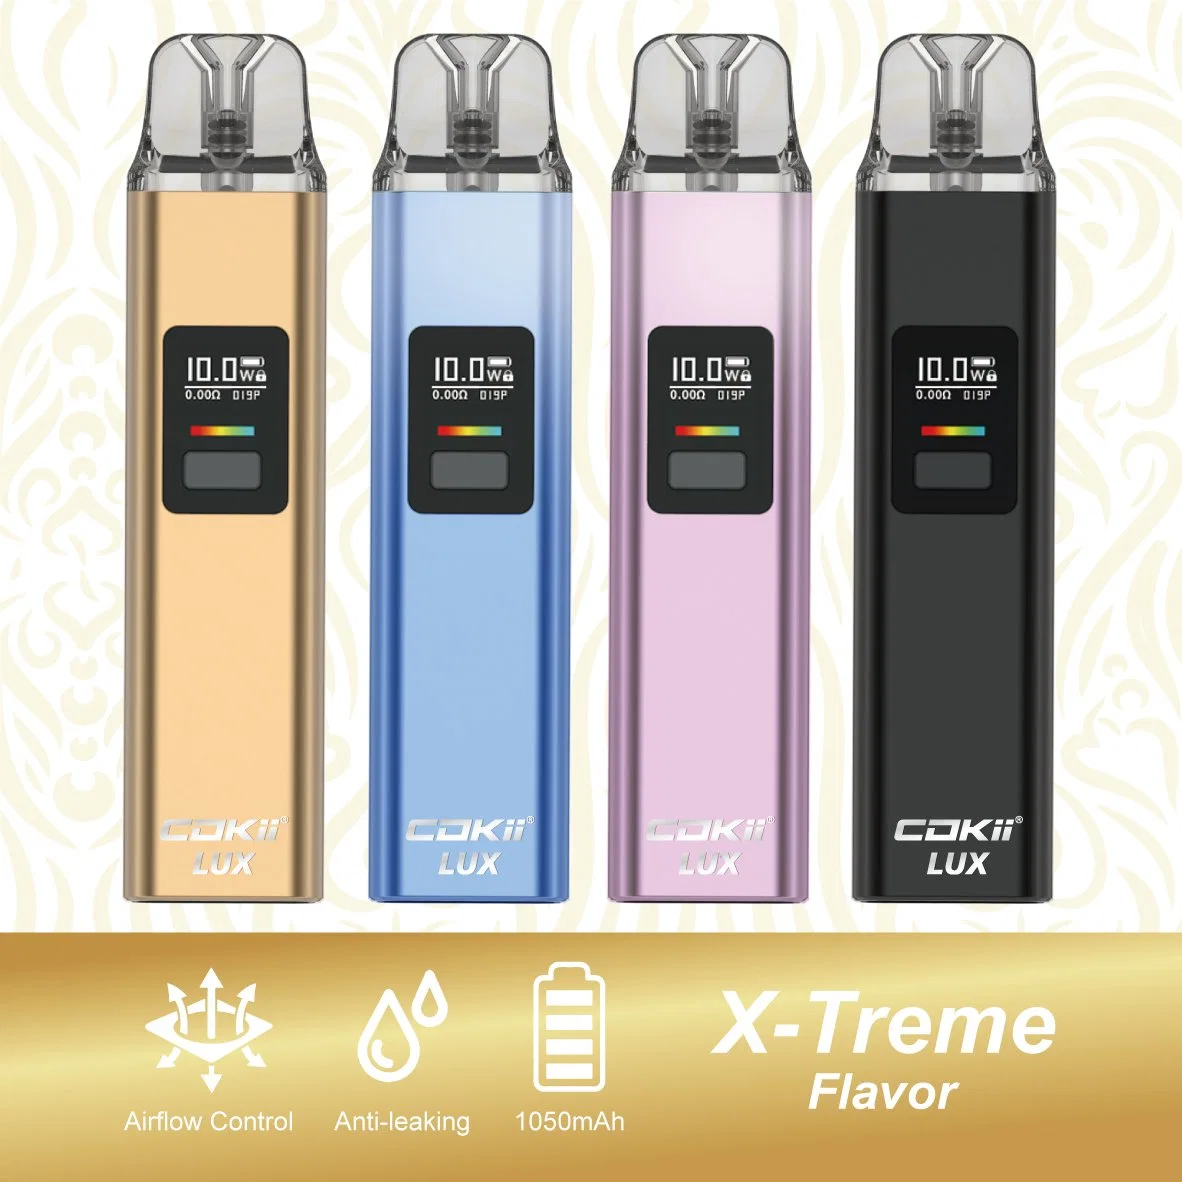 Crystal Prime Electronic Liquid Ultra Aroma Diffuser Pen 7000 800 Puffs Plus Vaper Digital Pod E Cigarette Price Disposable/Chargeable Vapes